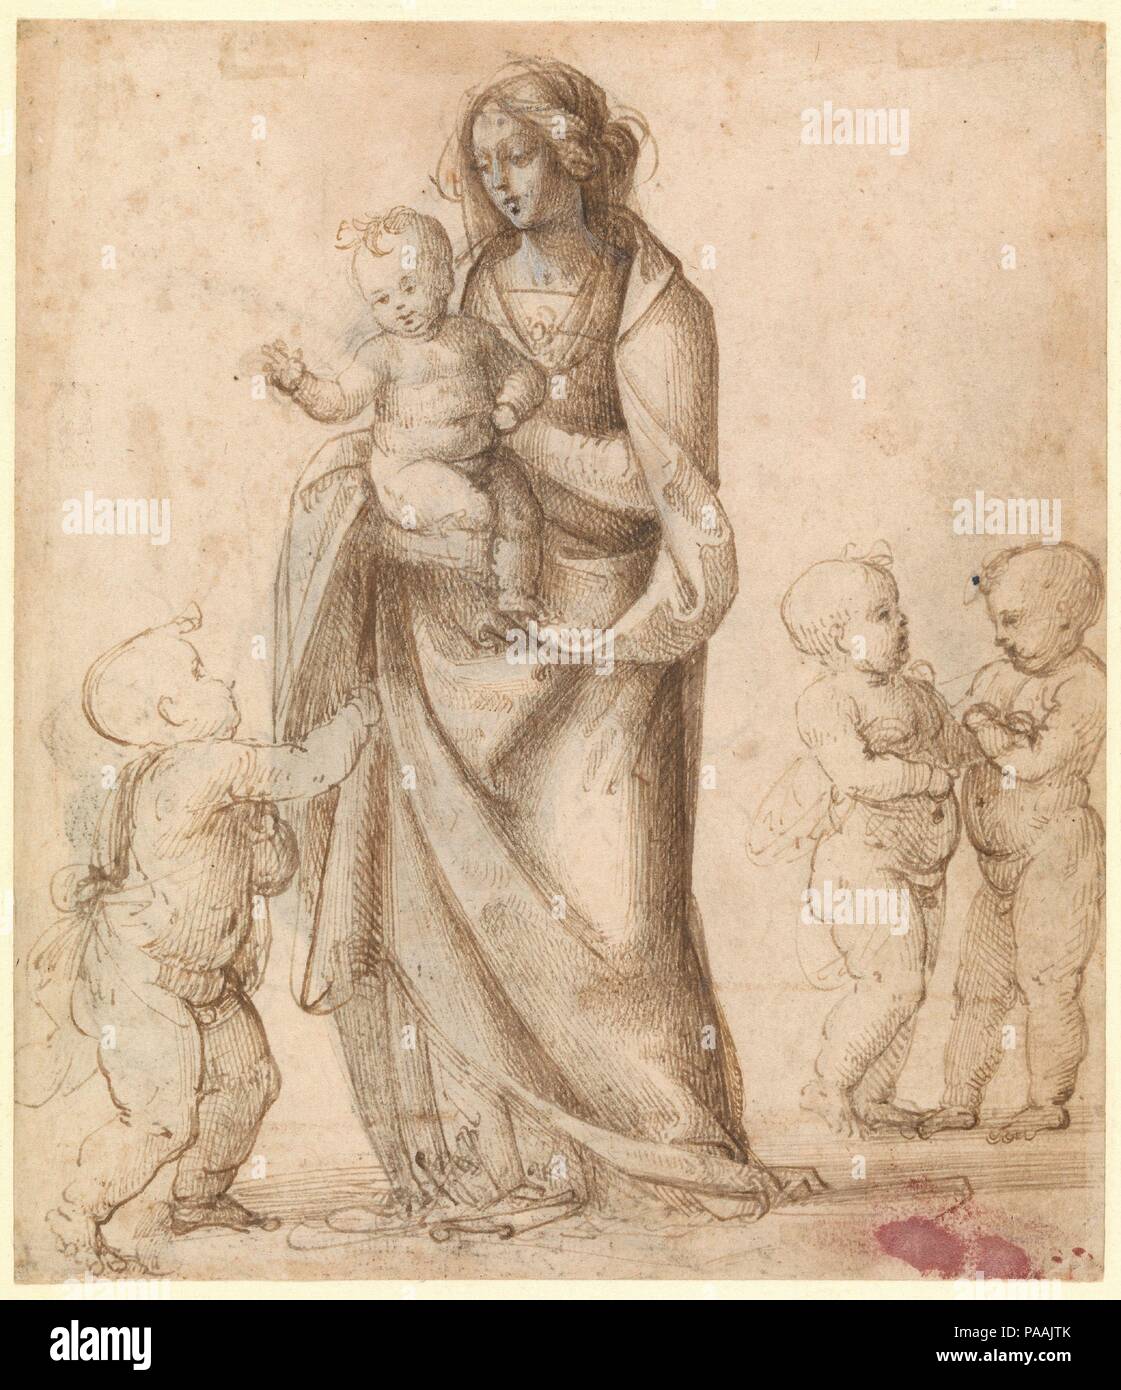 Madonna and Child with the Infant Saint John the Baptist and Two Putti (recto); Madonna and Child with the Infant Saint John the Baptist and a Putto (verso). Artist: Fra Bartolomeo (Bartolomeo di Paolo del Fattorino) (Italian, Florence 1473-1517 Florence). Dimensions: 7 3/8 x 6 7/16 in.  (18.7 x 16.3 cm). Date: 1505-6(?).  This sheet likely served as an exploratory idea for a composition rather than a preparatory study for a particular painting. This drawing sheds light upon Fra Bartolomeo's practice of employing wooden models or puppets, revealed in the Virgin's unarticulated hands and the ar Stock Photo